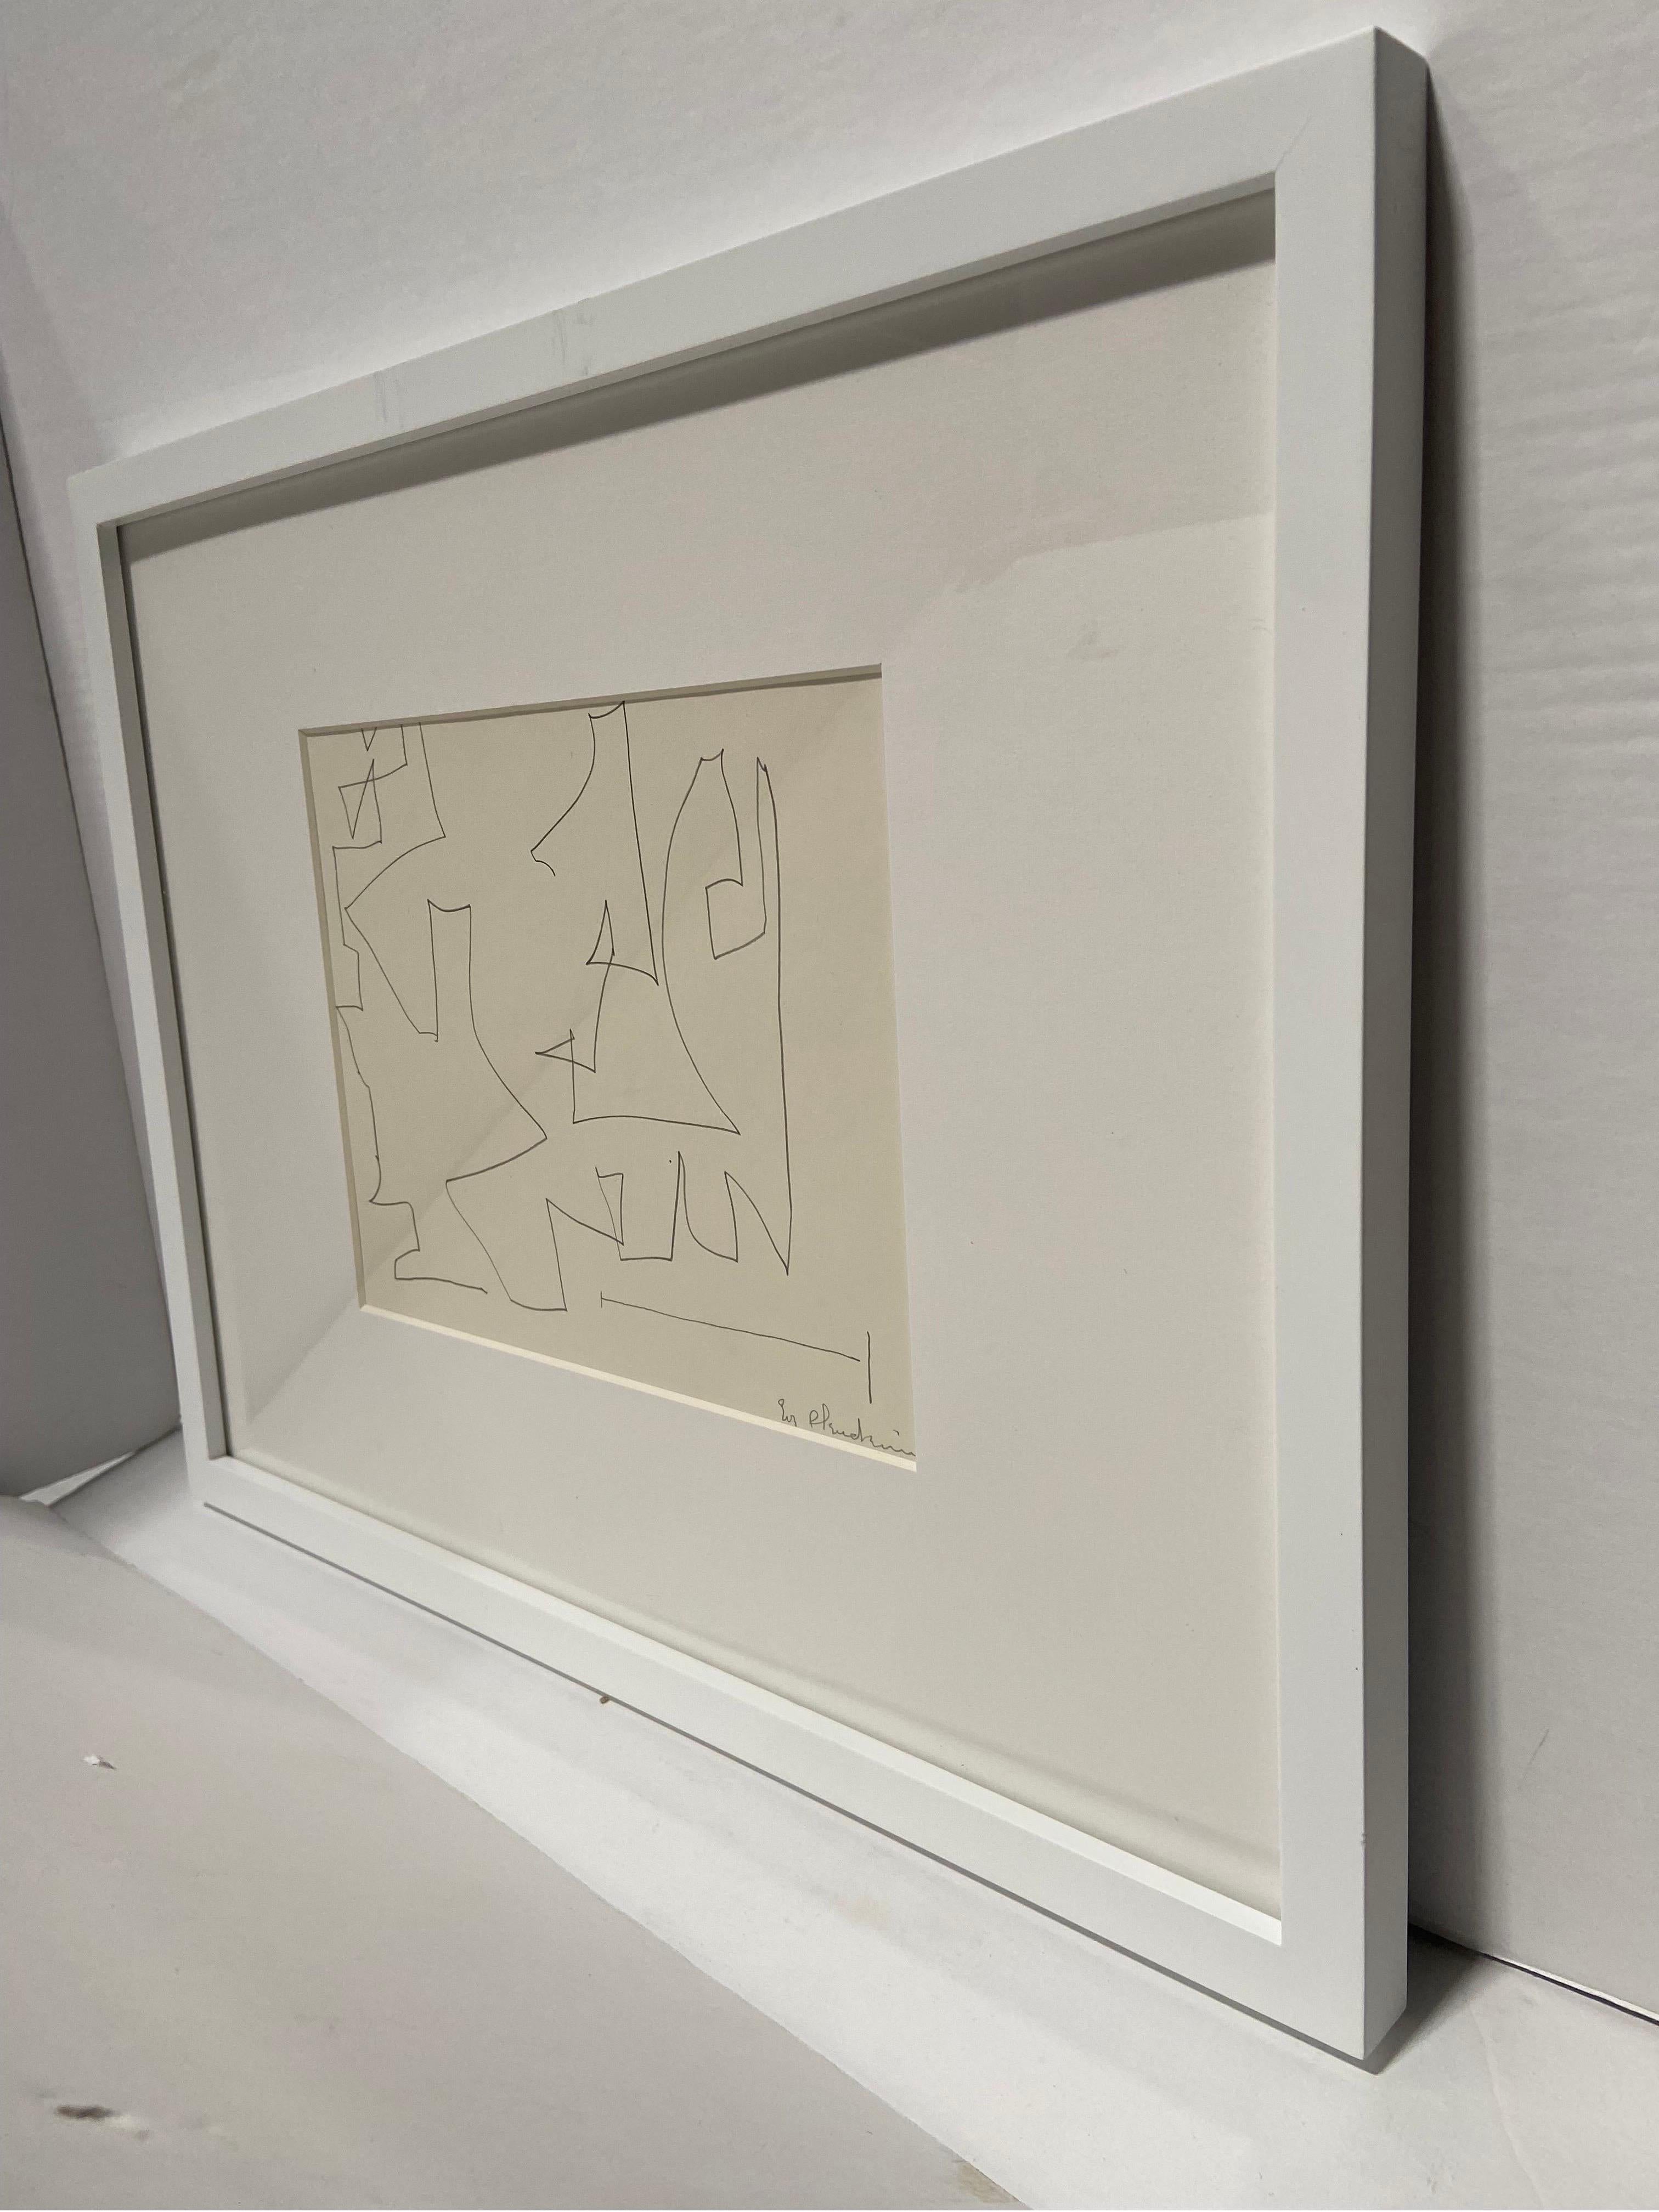 A geometric abstract drawing work on paper by New York City artist Eve Clendenin (1900 - 1974). Ms. Clendenin was both a student of and friend to the master 20th Century artist Hans Hofmann. Her letters and correspondence to Mr. Hofmann are well